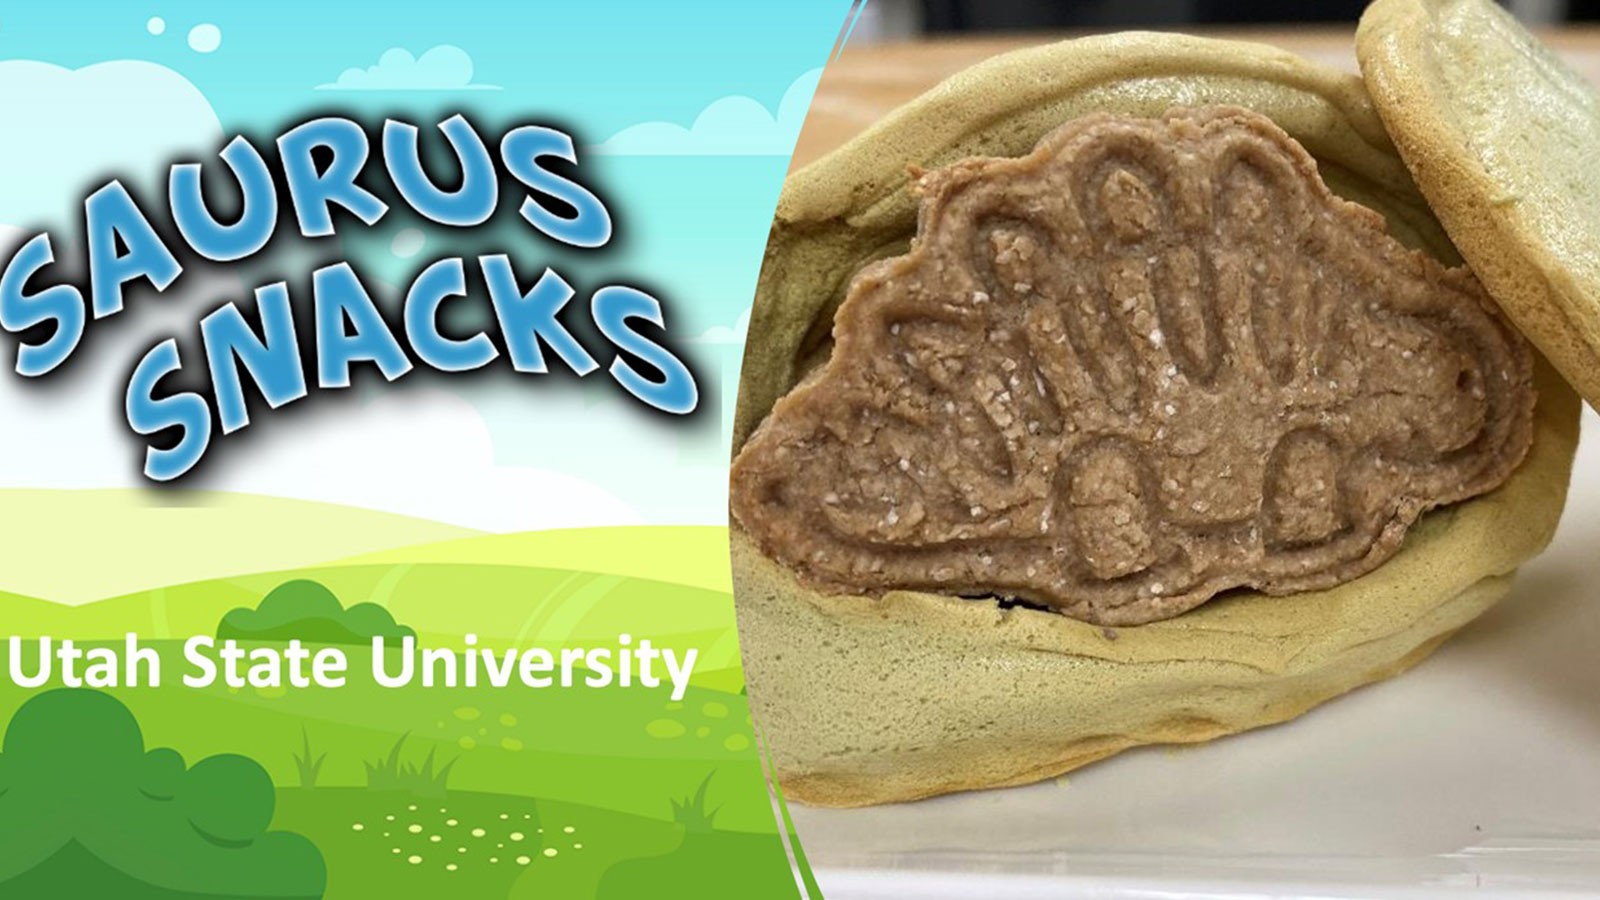 A product promotional image shows the text "Saurus Snacks" next to a dinosaur cookie.